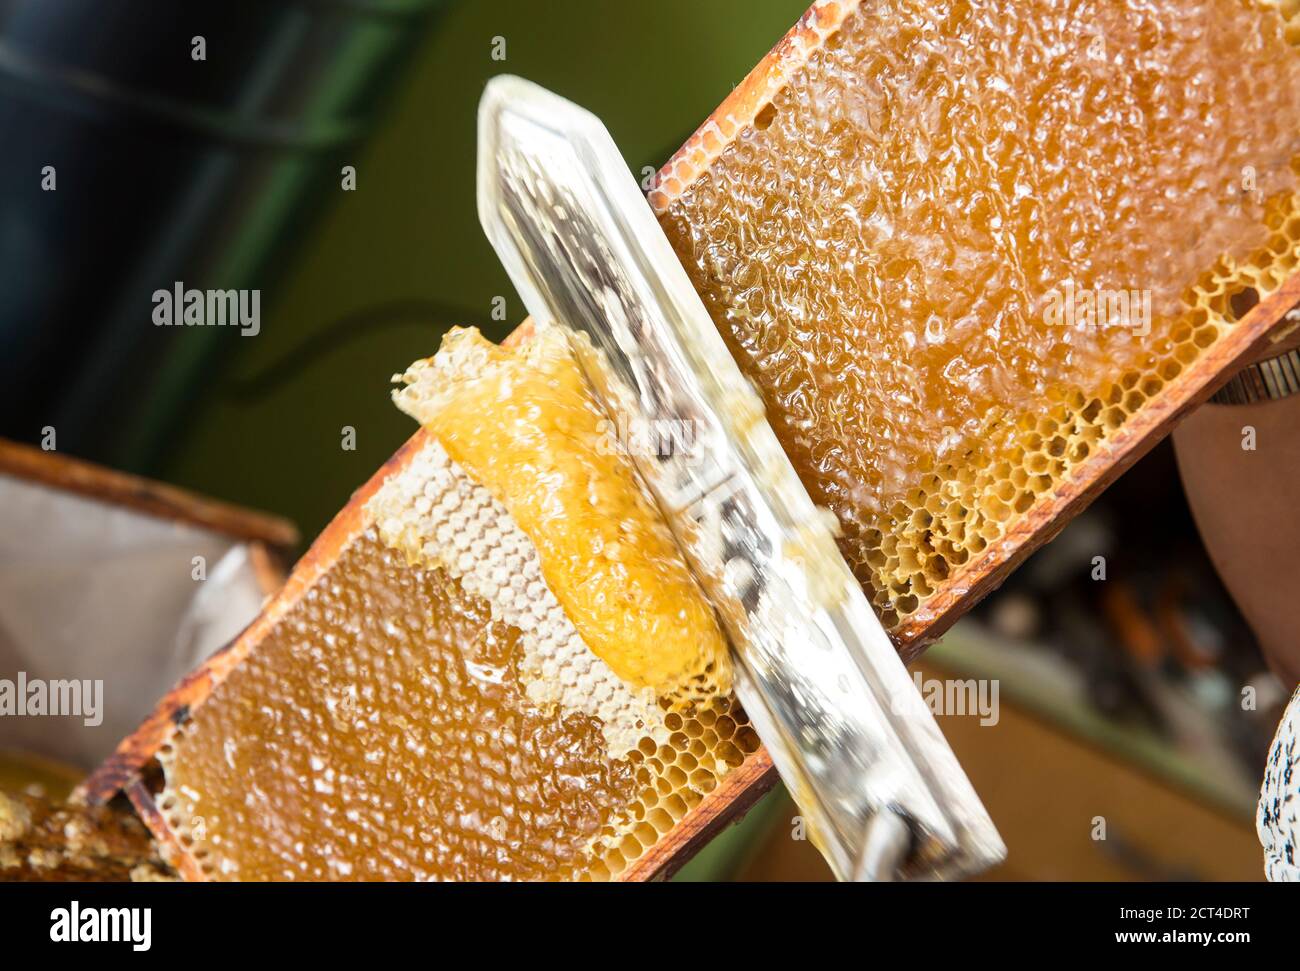 Extracting honey from honeycomb concept. Close up view of beekeeper cutting wax lids with hot knife from honeycomb for honey extraction. Stock Photo